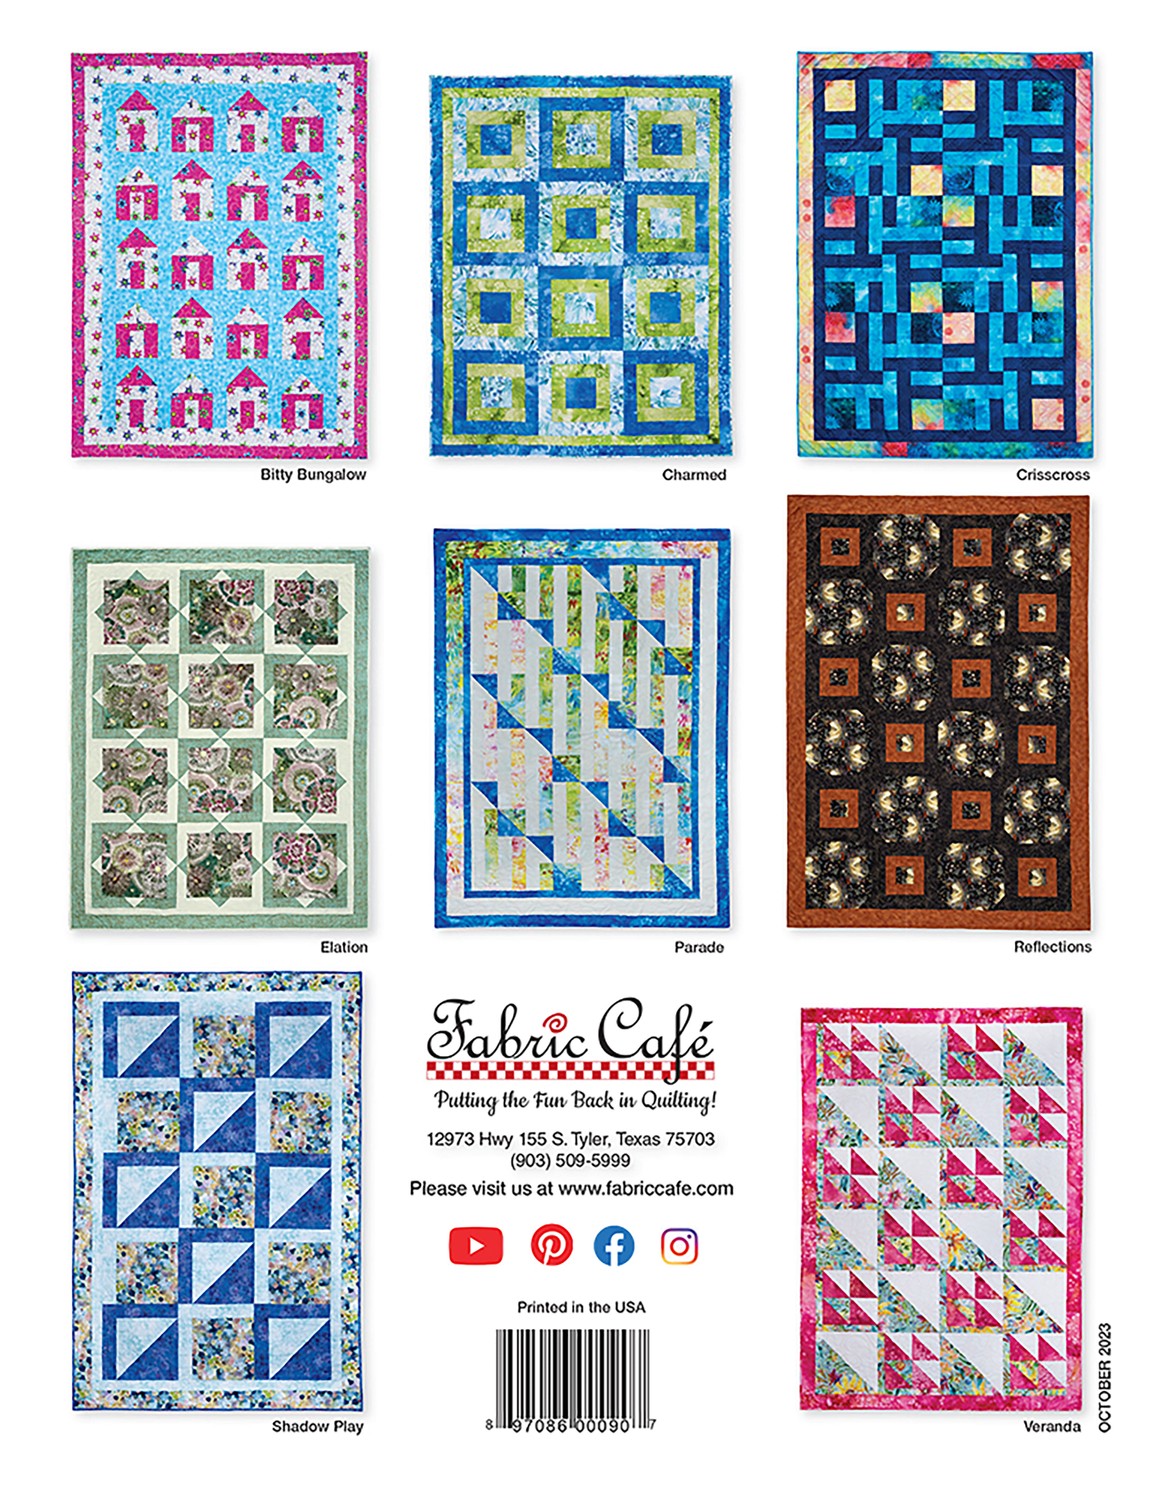 How to place fabric in a 3-Yard Quilt Pattern and New Fabric To